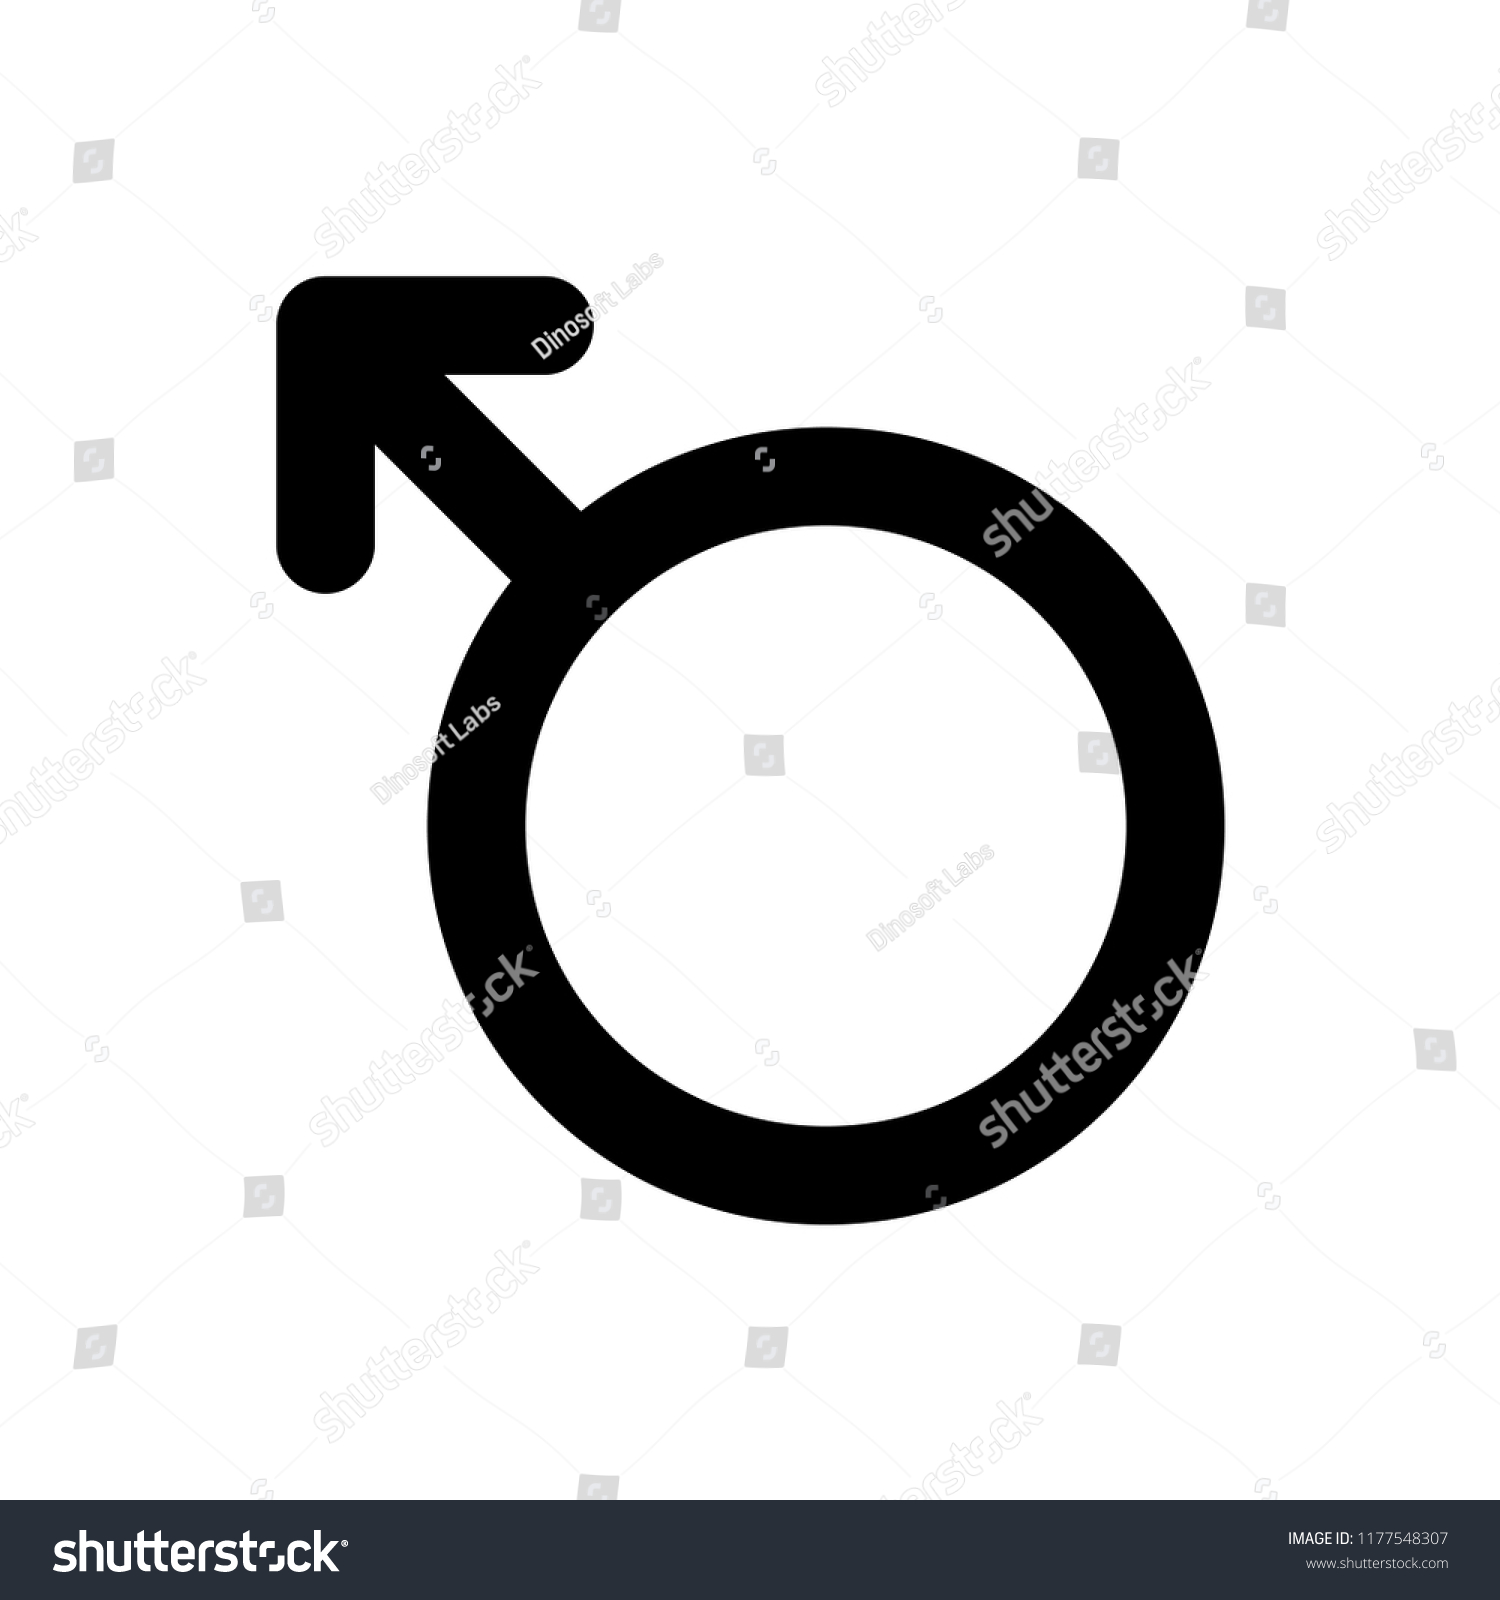  male sign sex  #1177548307